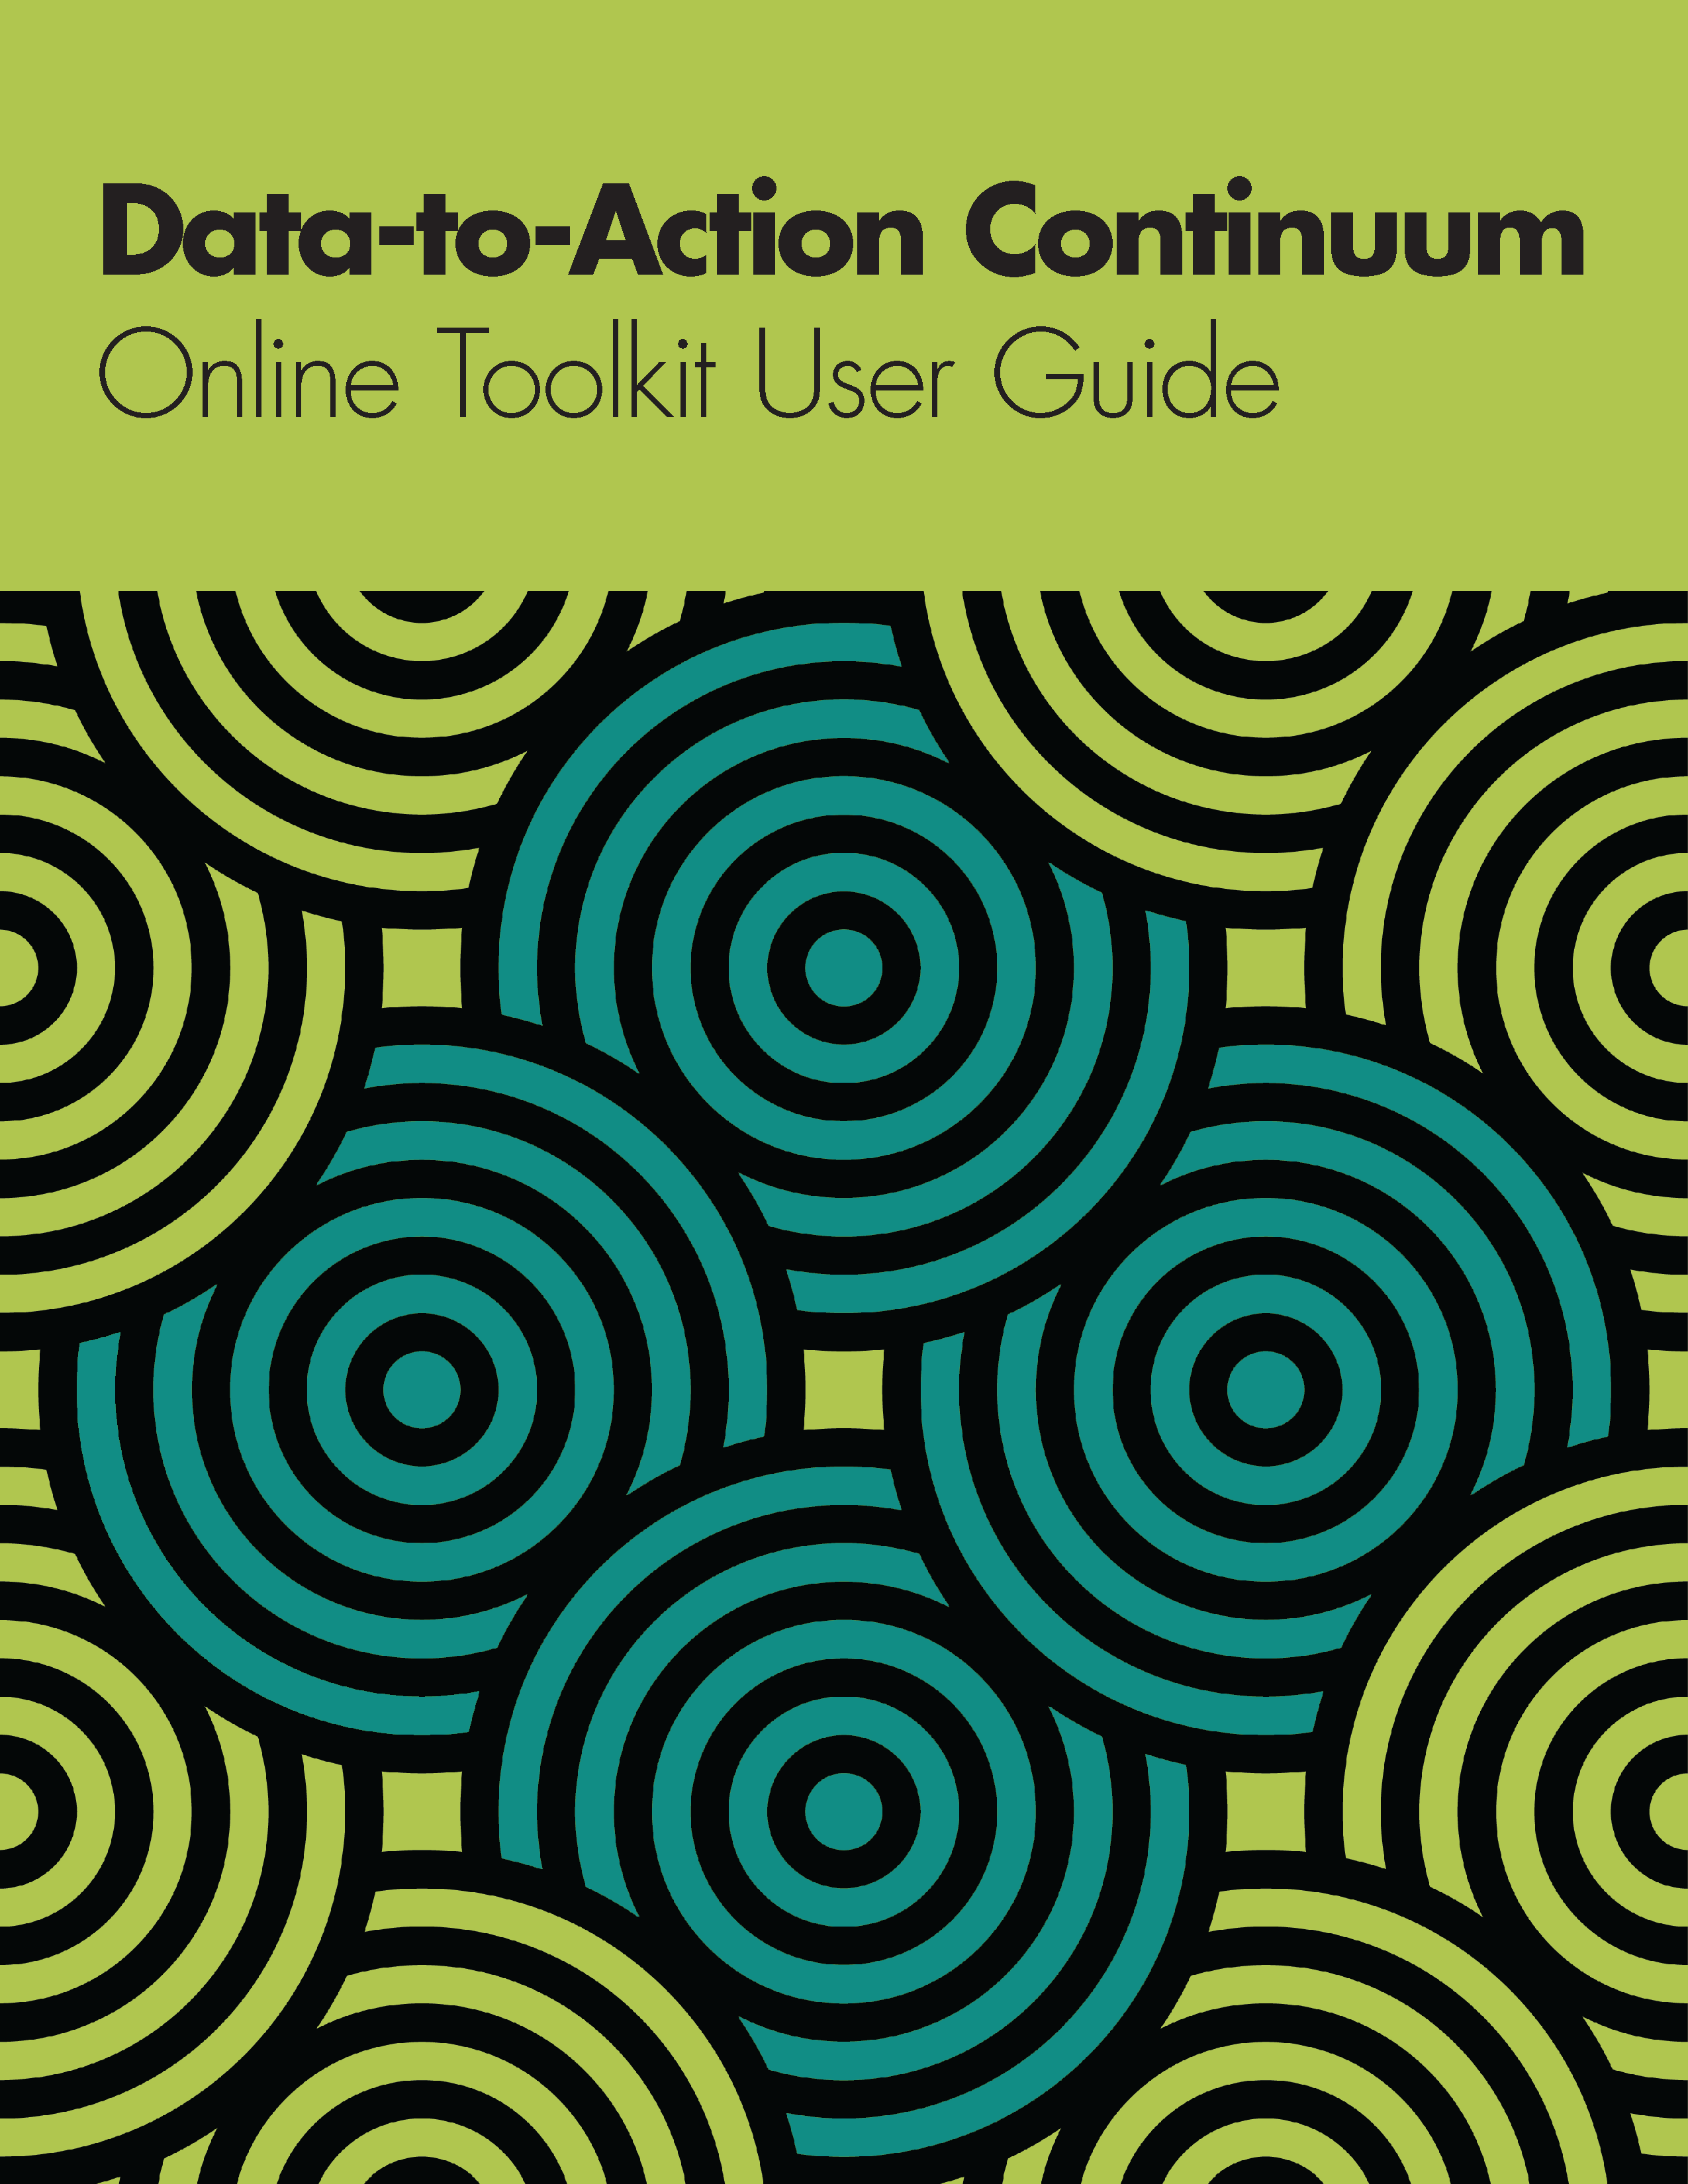 D2AC Toolkit and assessment user guide cover